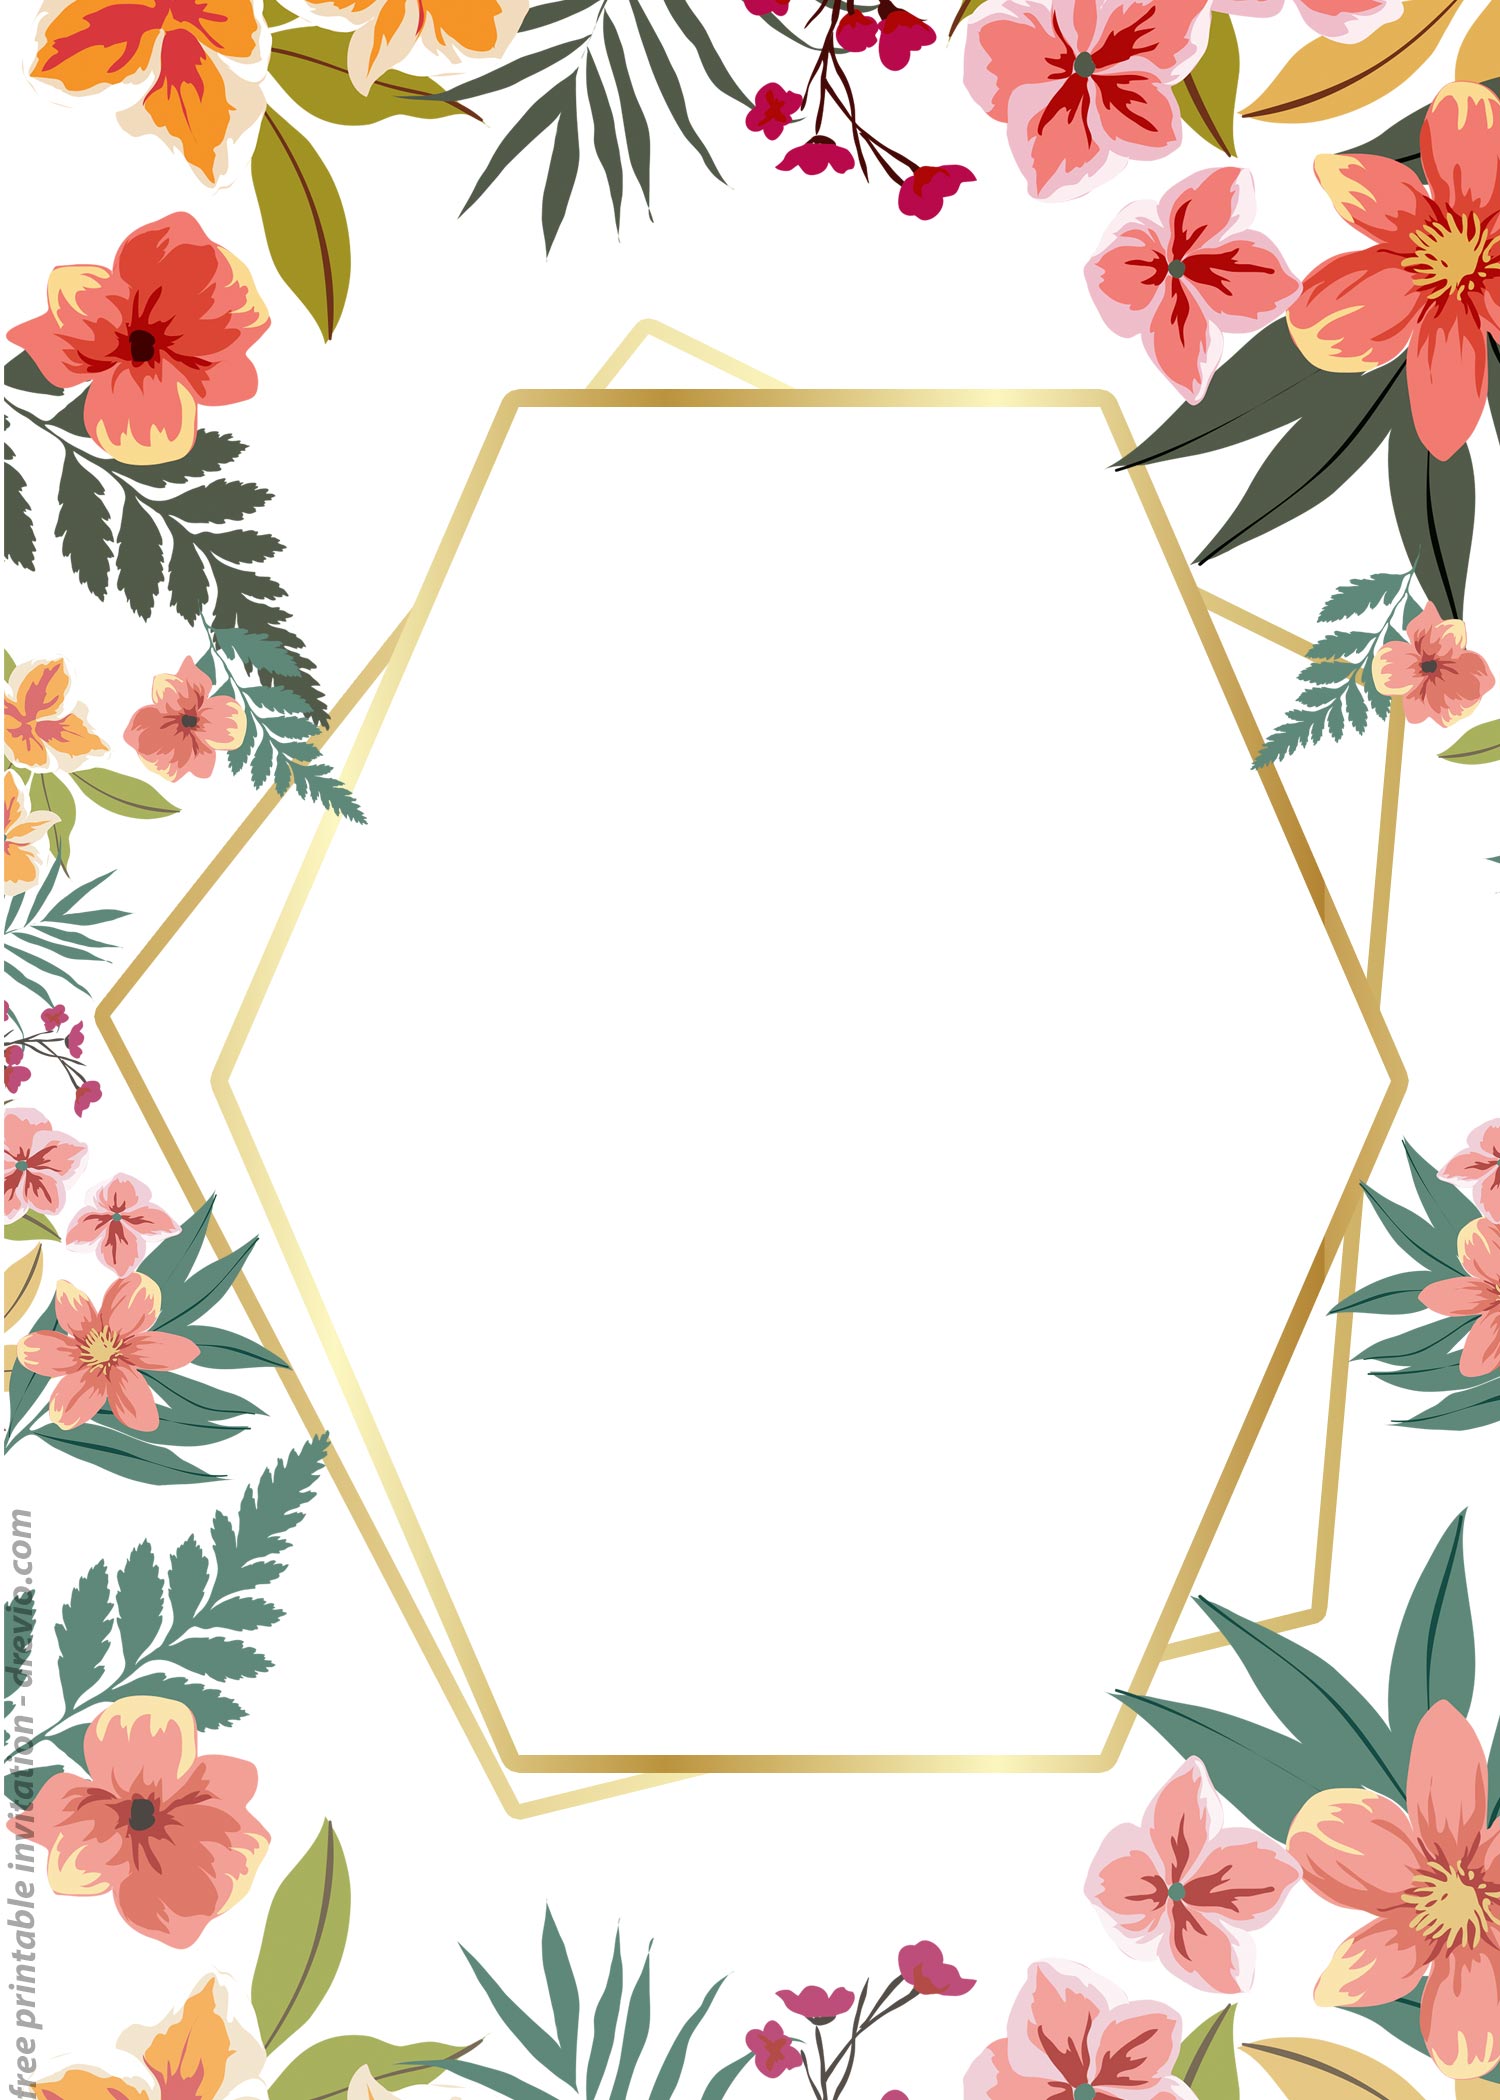 FREE-Printable-Floral-Tropical-Invitation-Templates